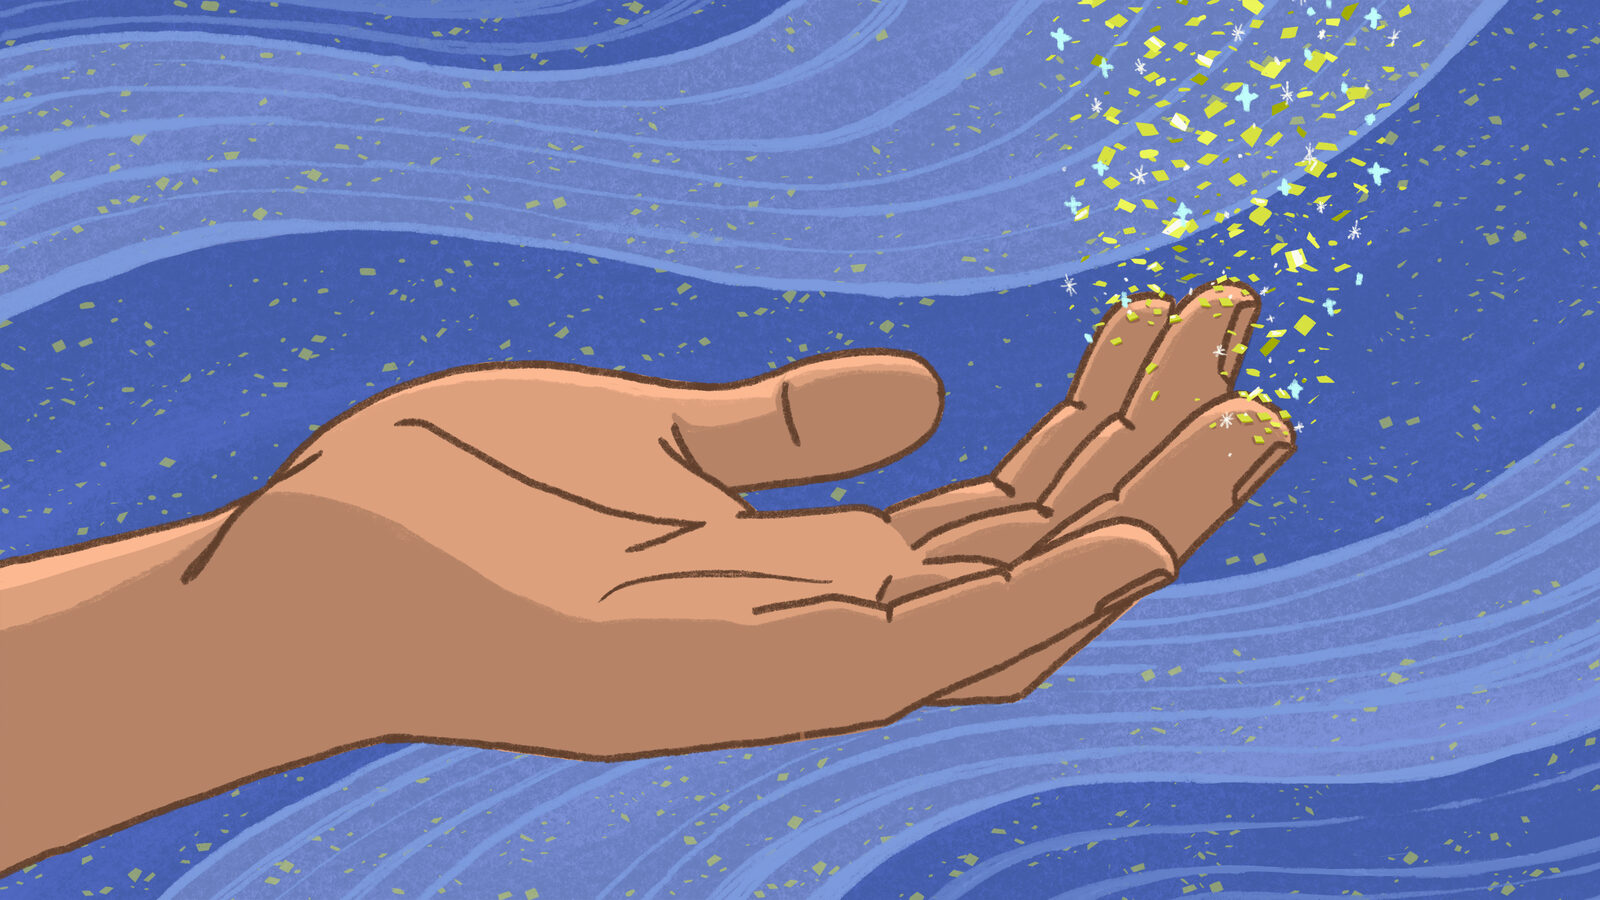 Illustration of a hand with glitter near the fingertips